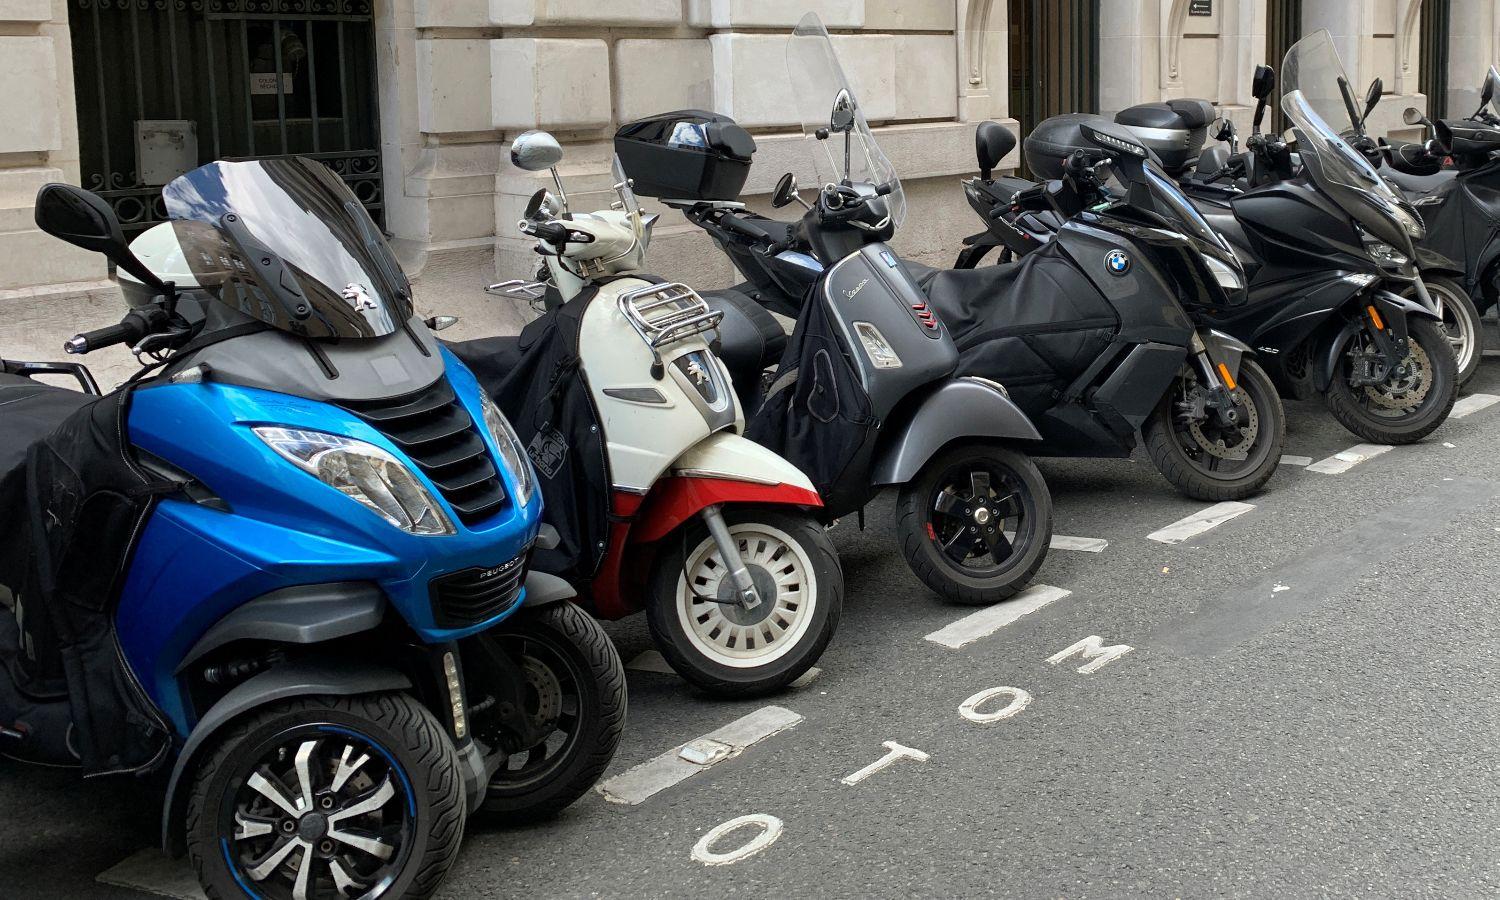 French Govt To Consult Over Motorbike Road Tests After Court Order